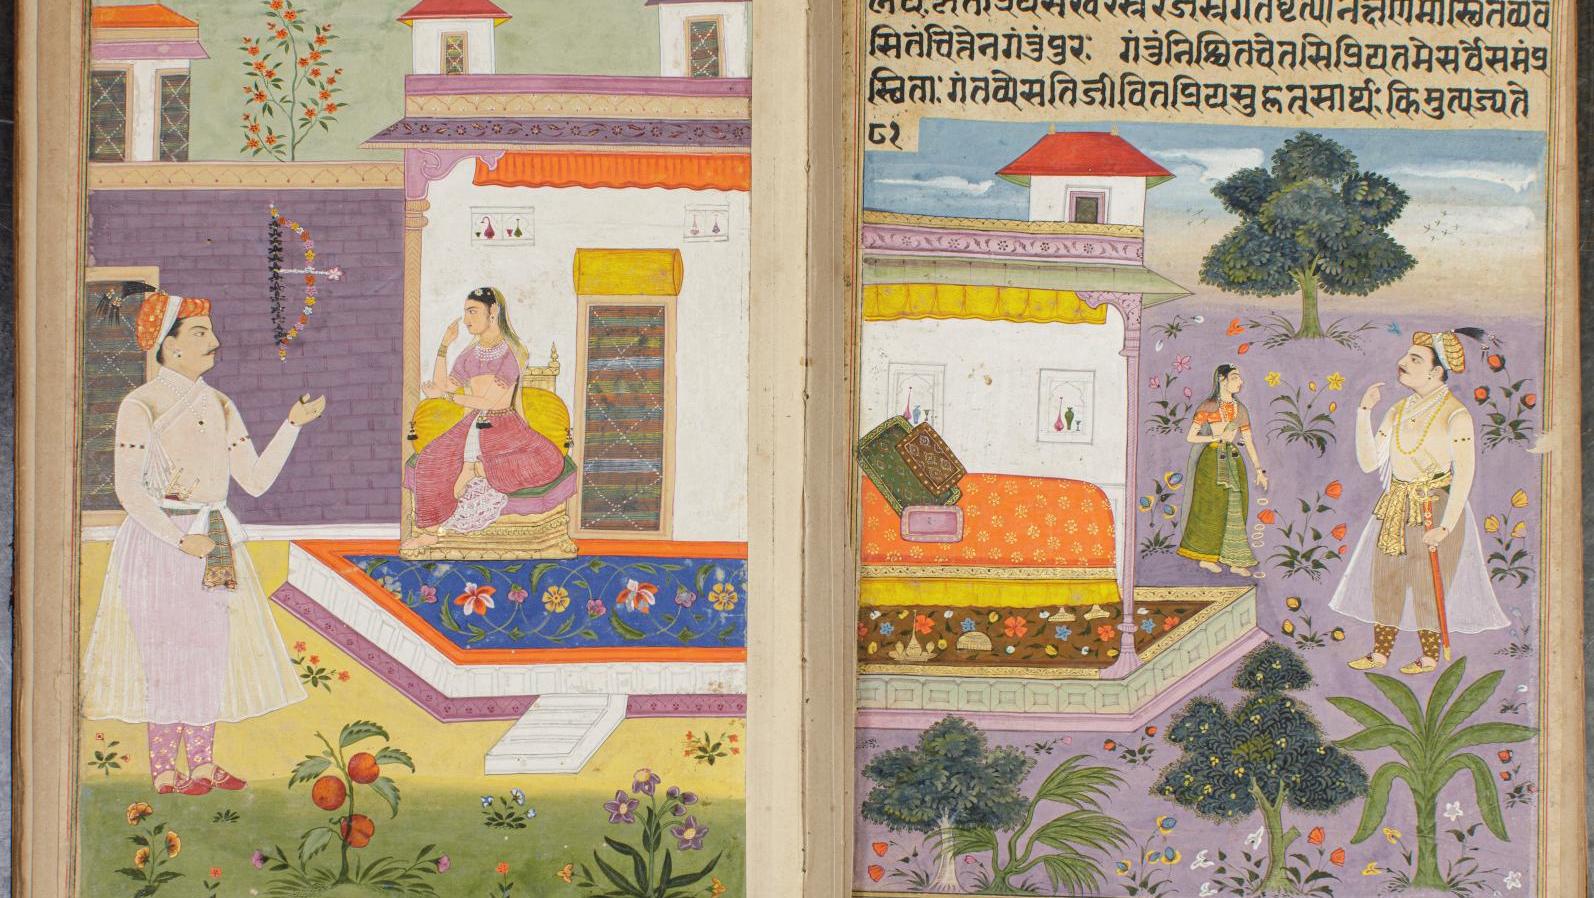 India, “Provincial Mughal” style, first quarter of the 17th century. Album of 30... The Love Story of Amar Chattar and Sundari Virda in the Pure “Provincial Mughal” Style